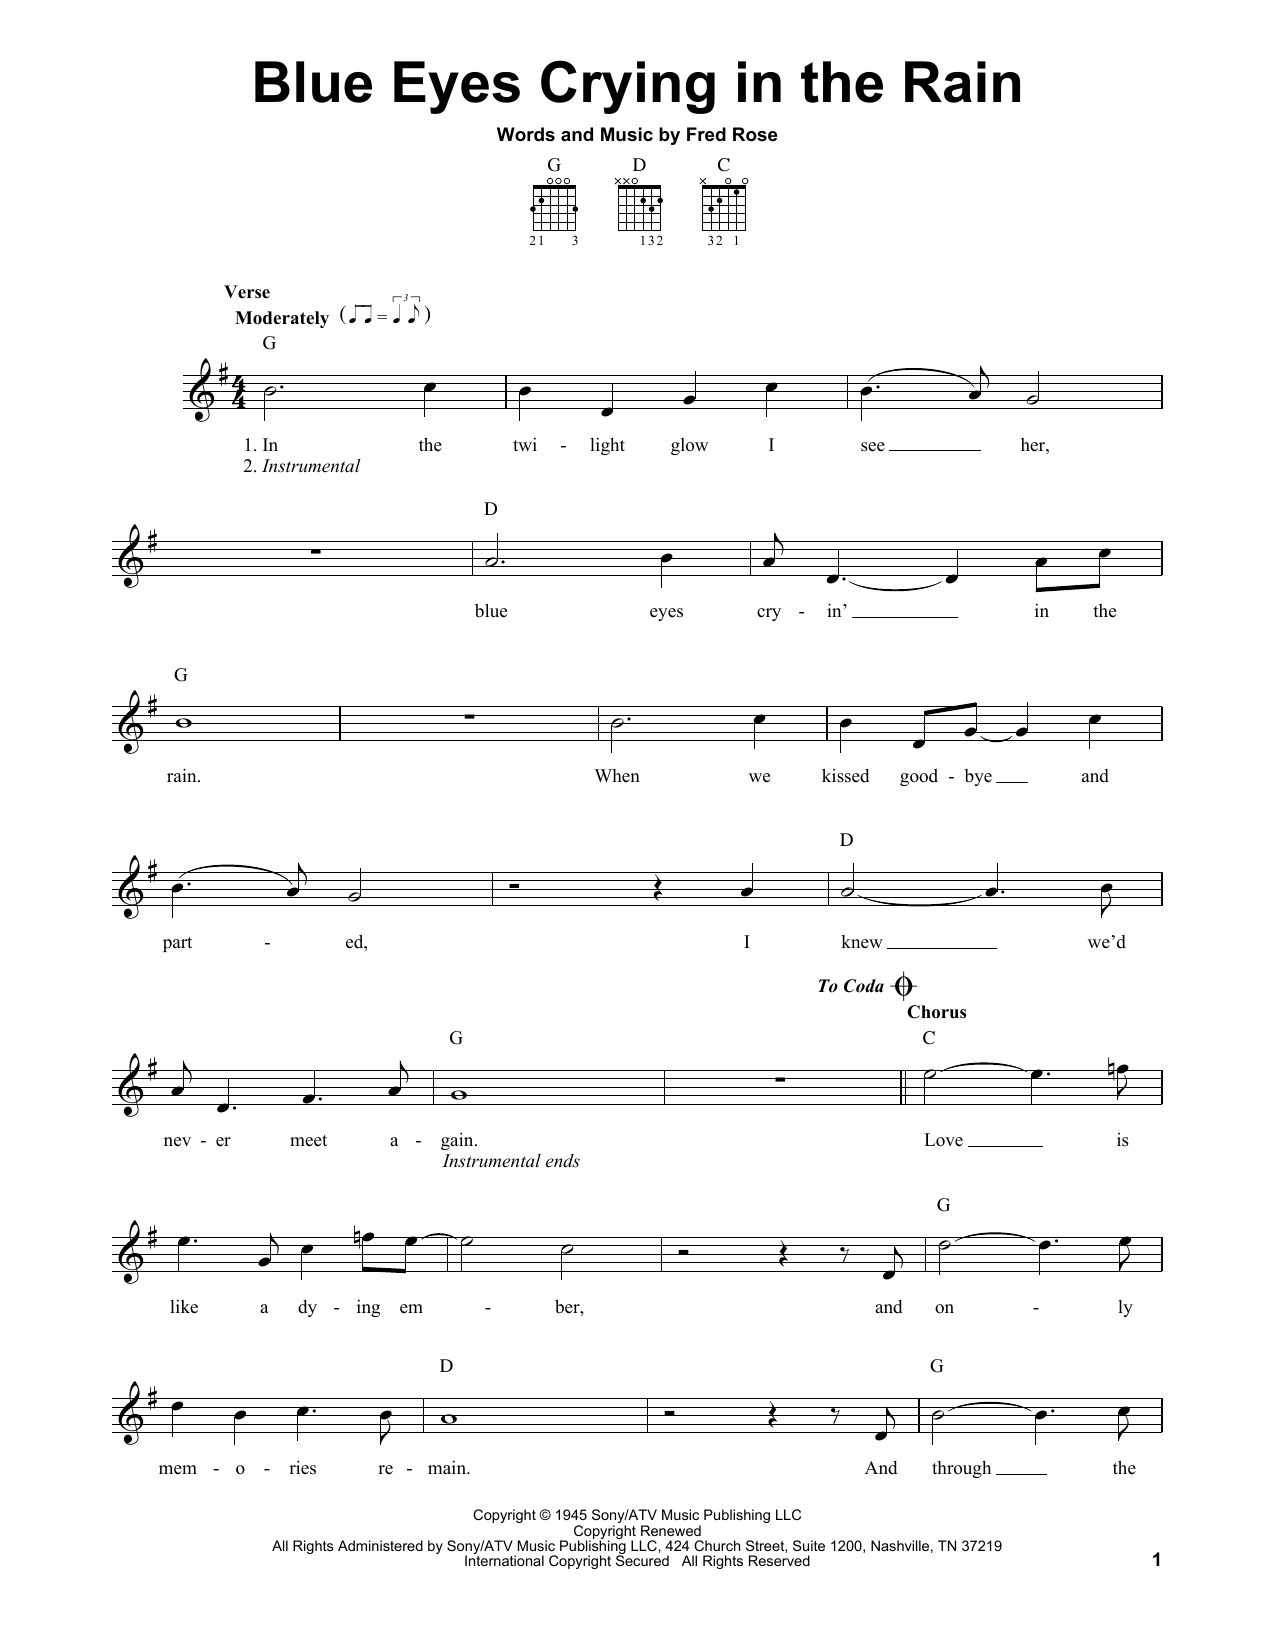 Download Willie Nelson Blue Eyes Crying In The Rain Sheet Music